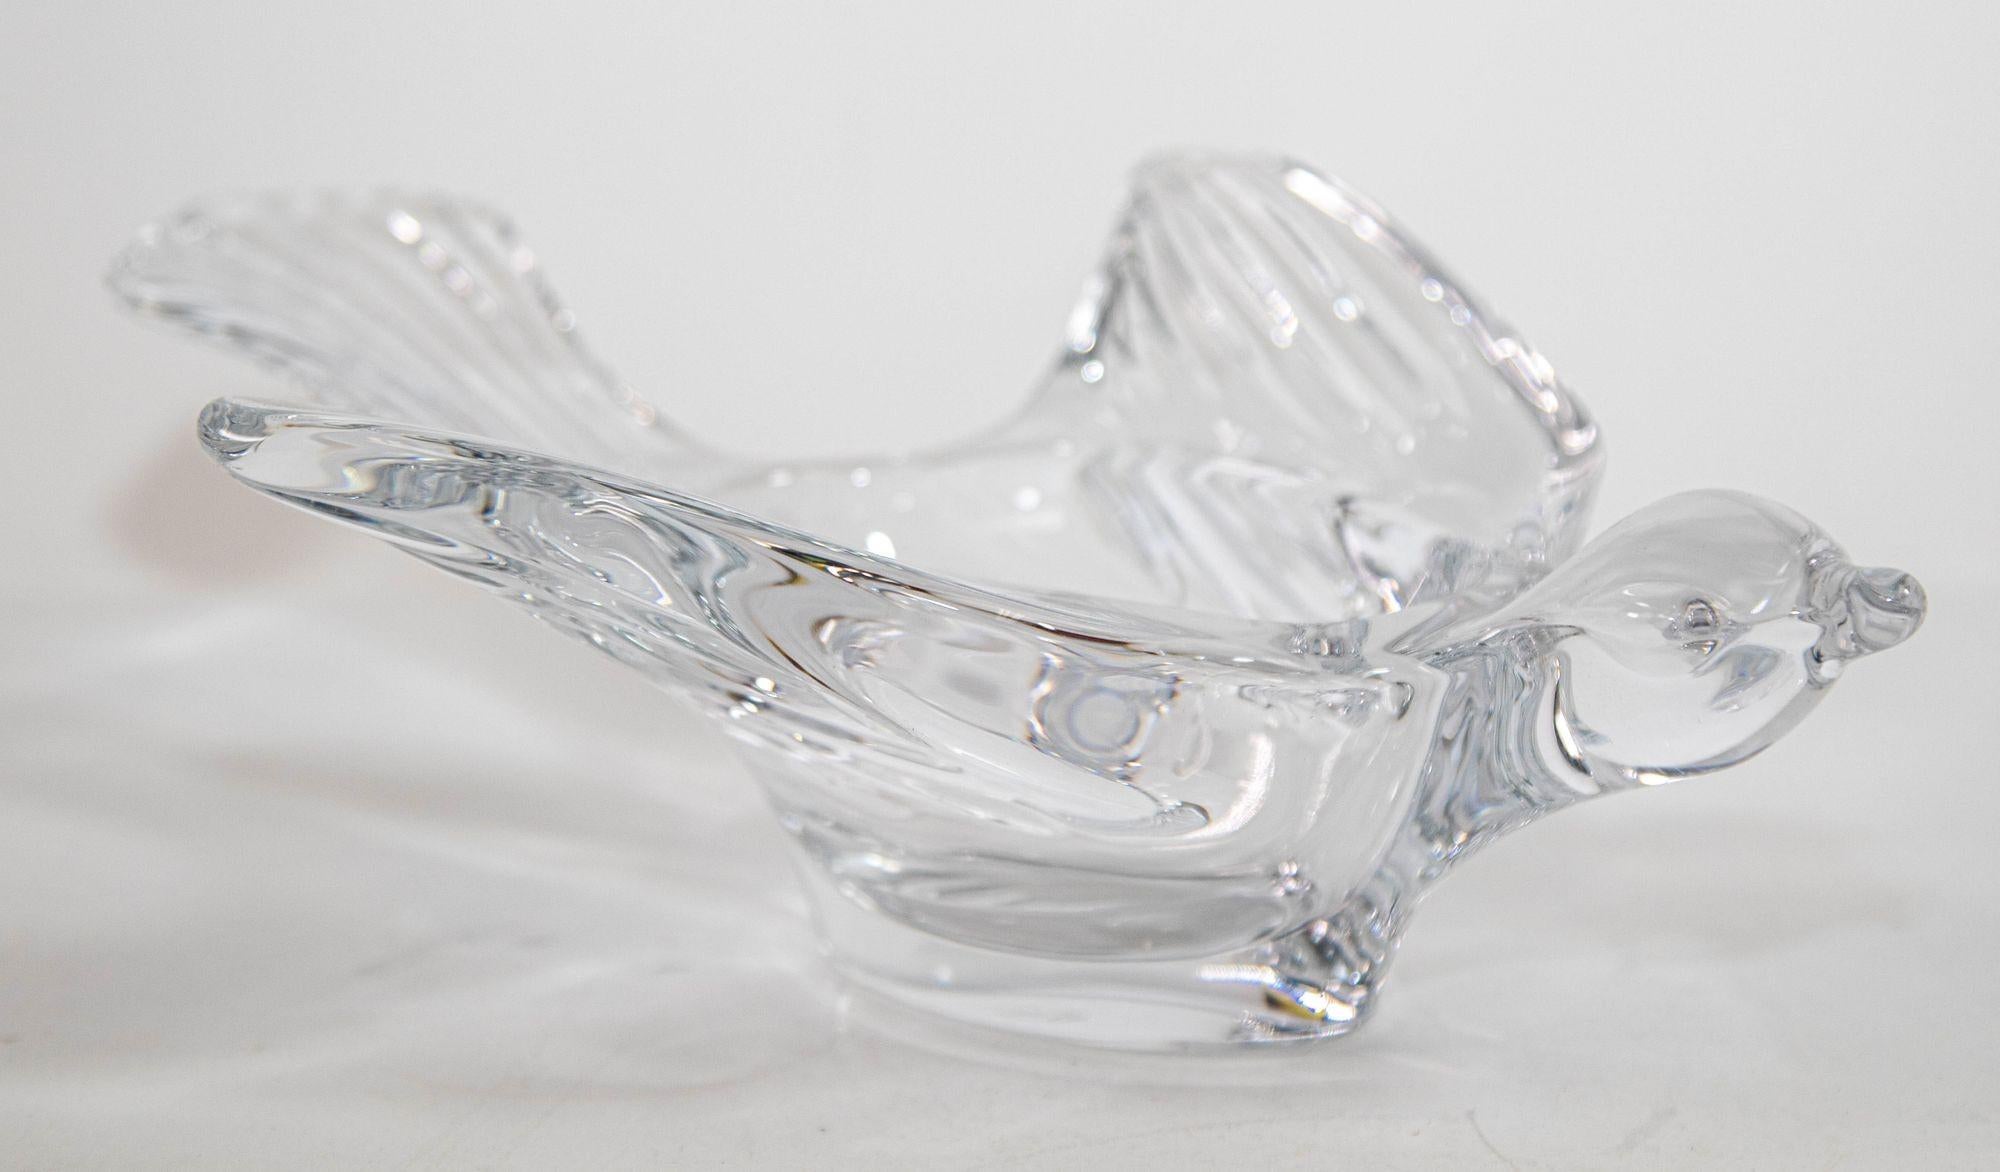 BACCARAT Crystal Peace Dove Dish Vide Poche Catchall Paperweight.
Vintage Baccarat gorgeous stylized dove crystal glass sculptural paperweight or Desk Accessory.
This fabulous vintage sculptural large heavy crystal glass signed Baccarat paperweight